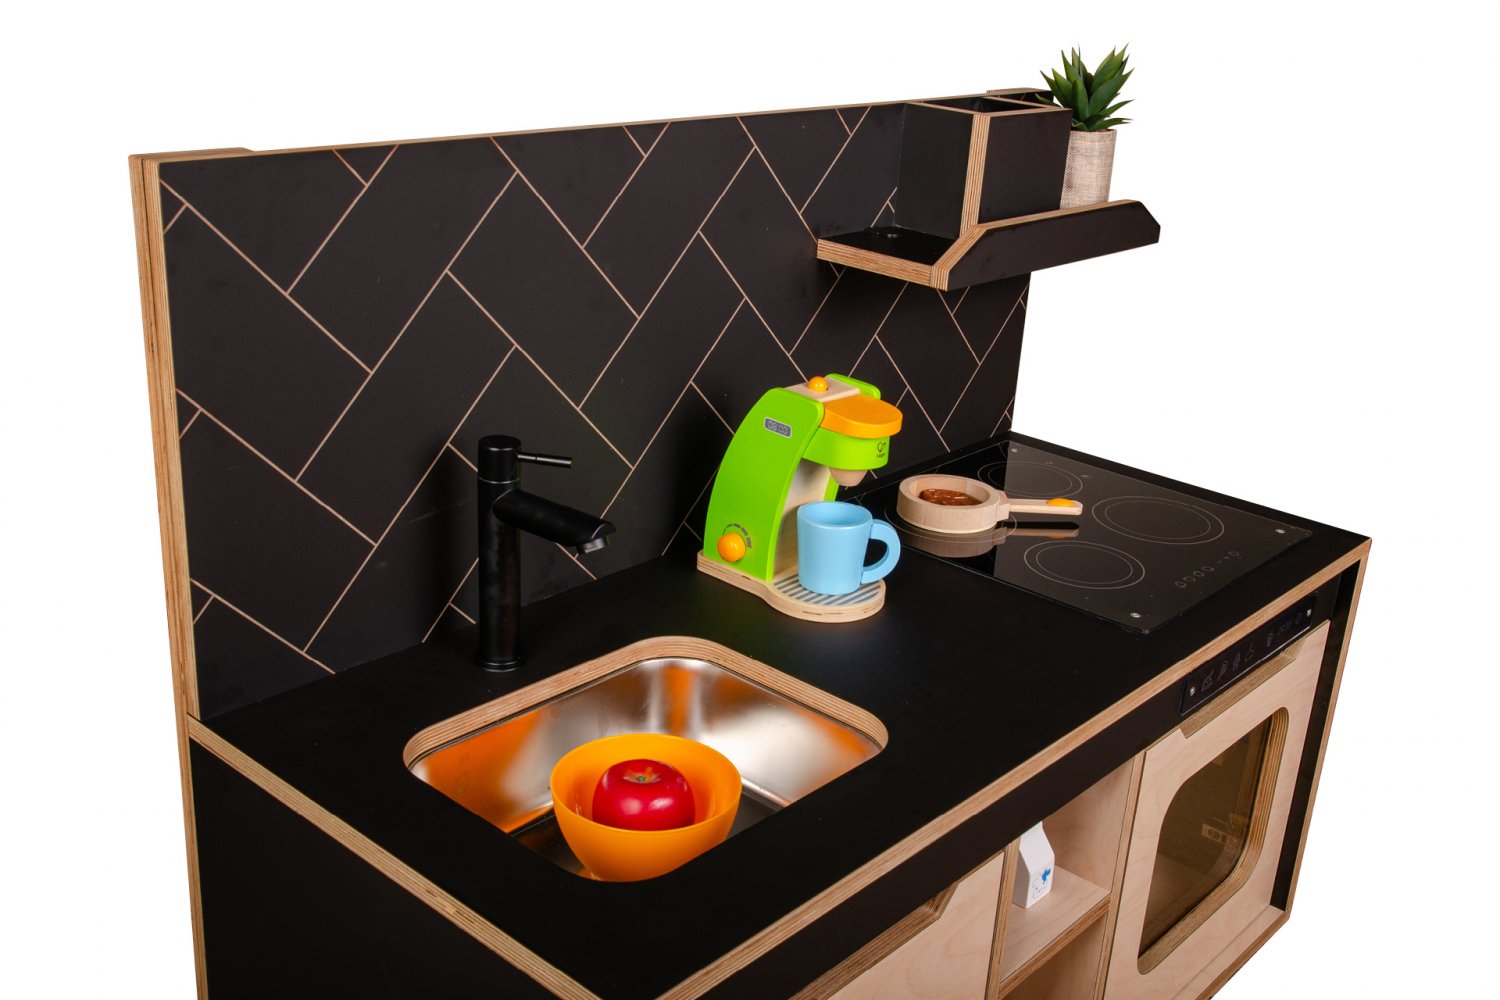 Wooden Plywood Kitchen for early learning BLACK